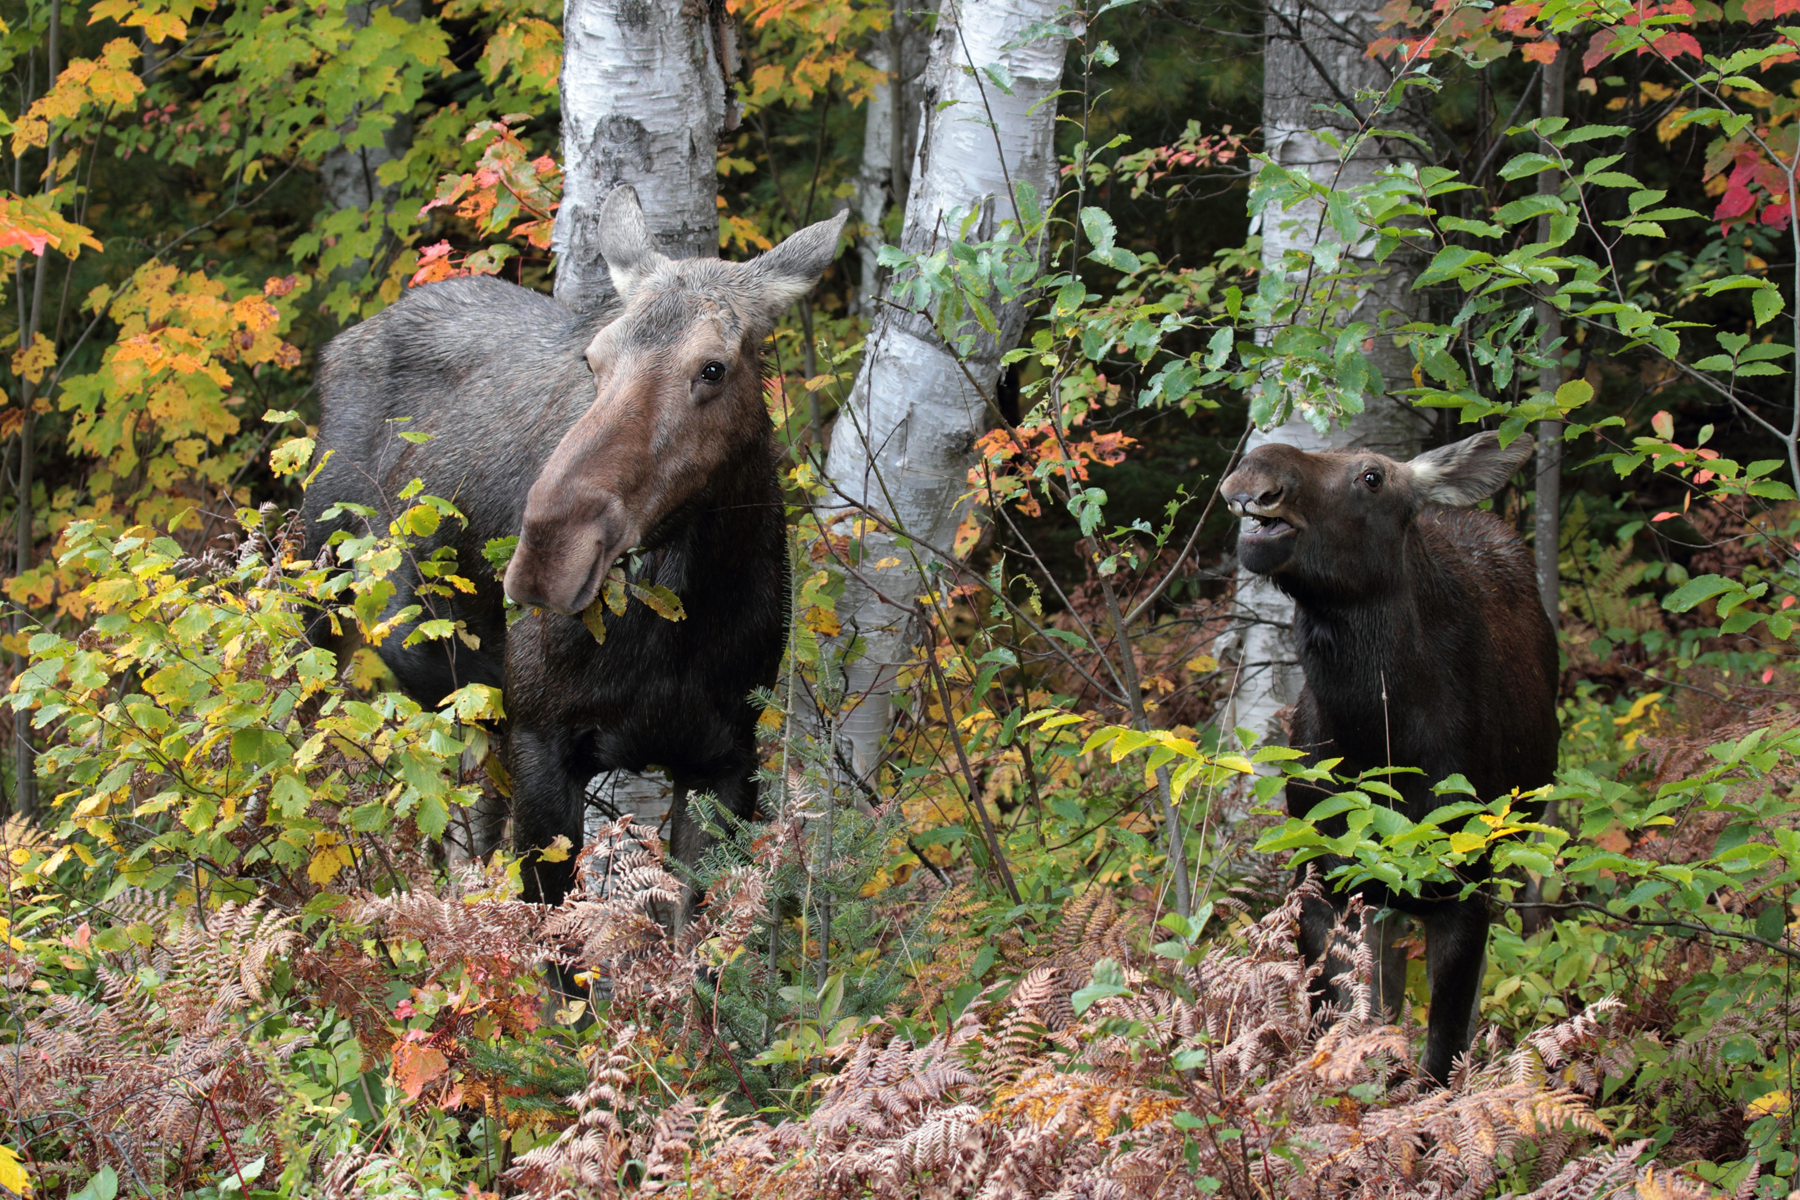 photo of a moose cow and moose calf eating shrubs in a forest.